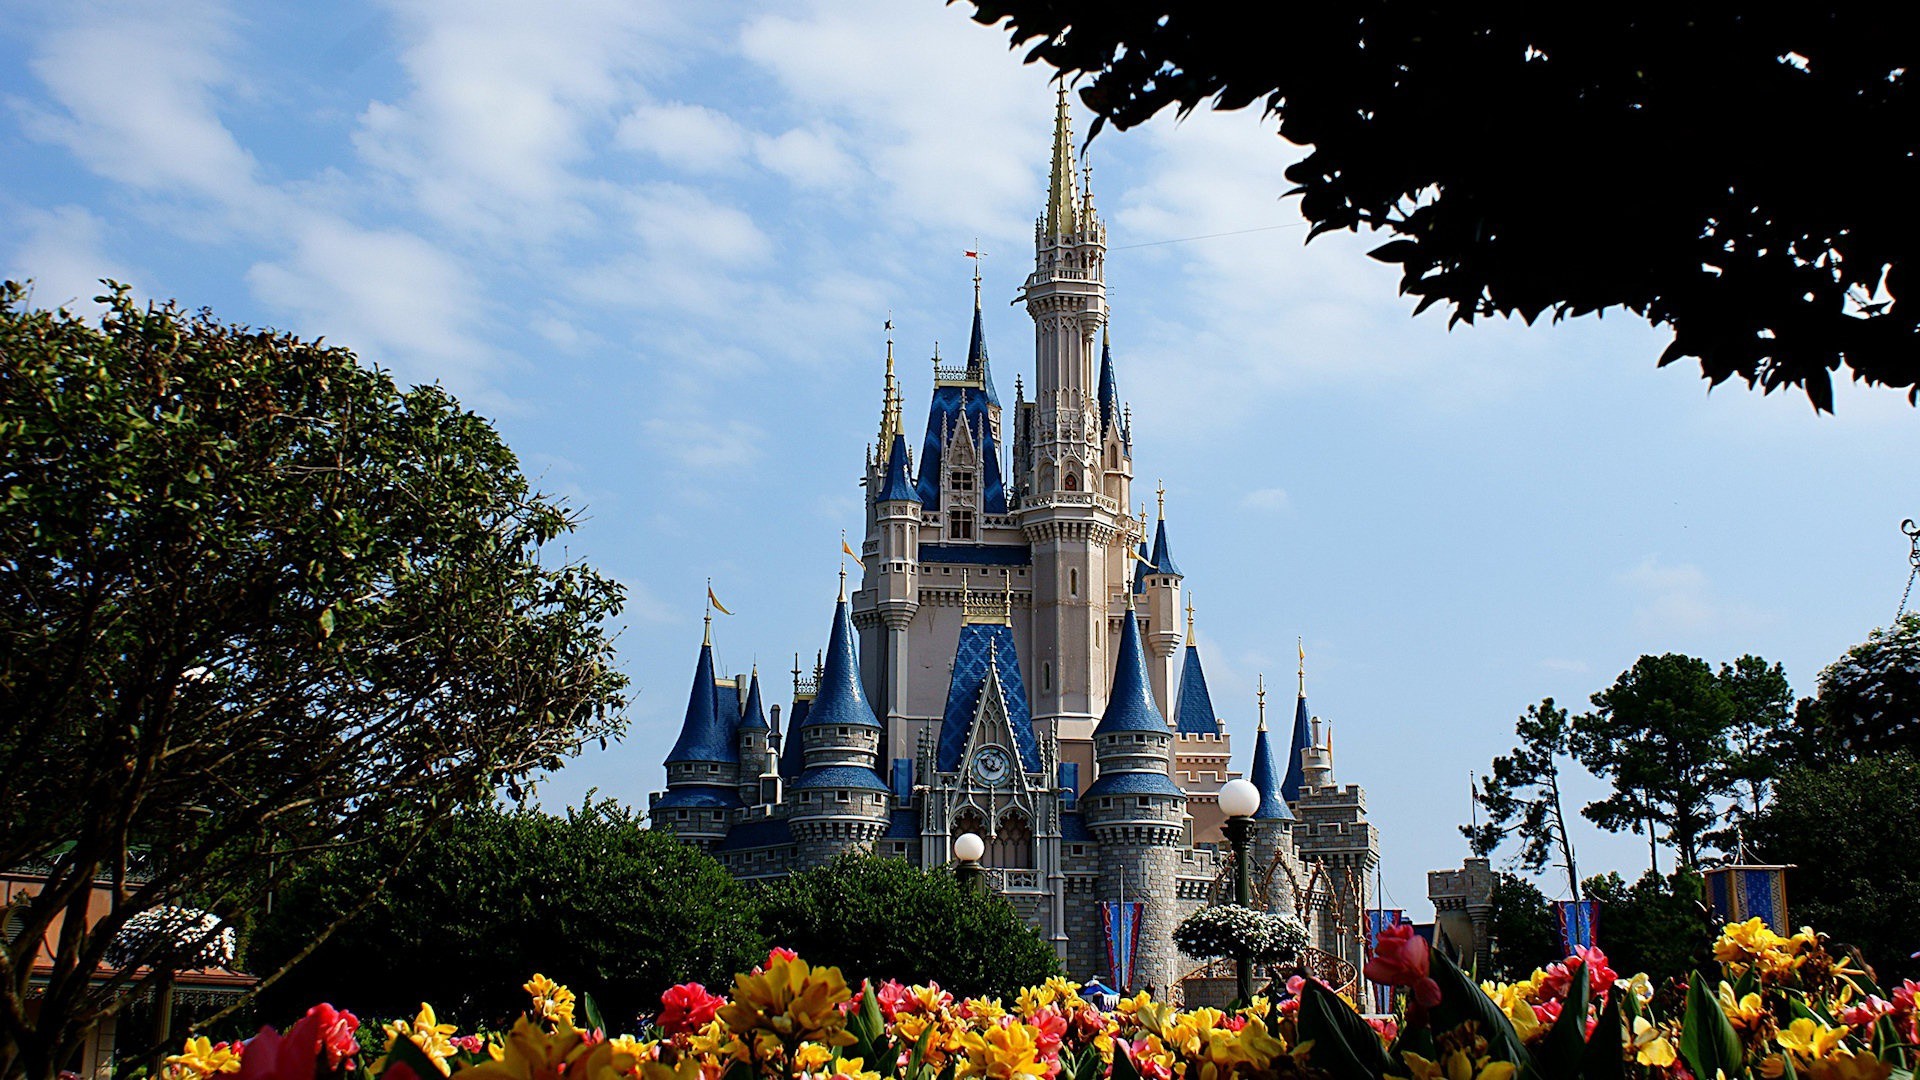 The 8 BIG Updates From Walt Disney World (and Beyond) This 